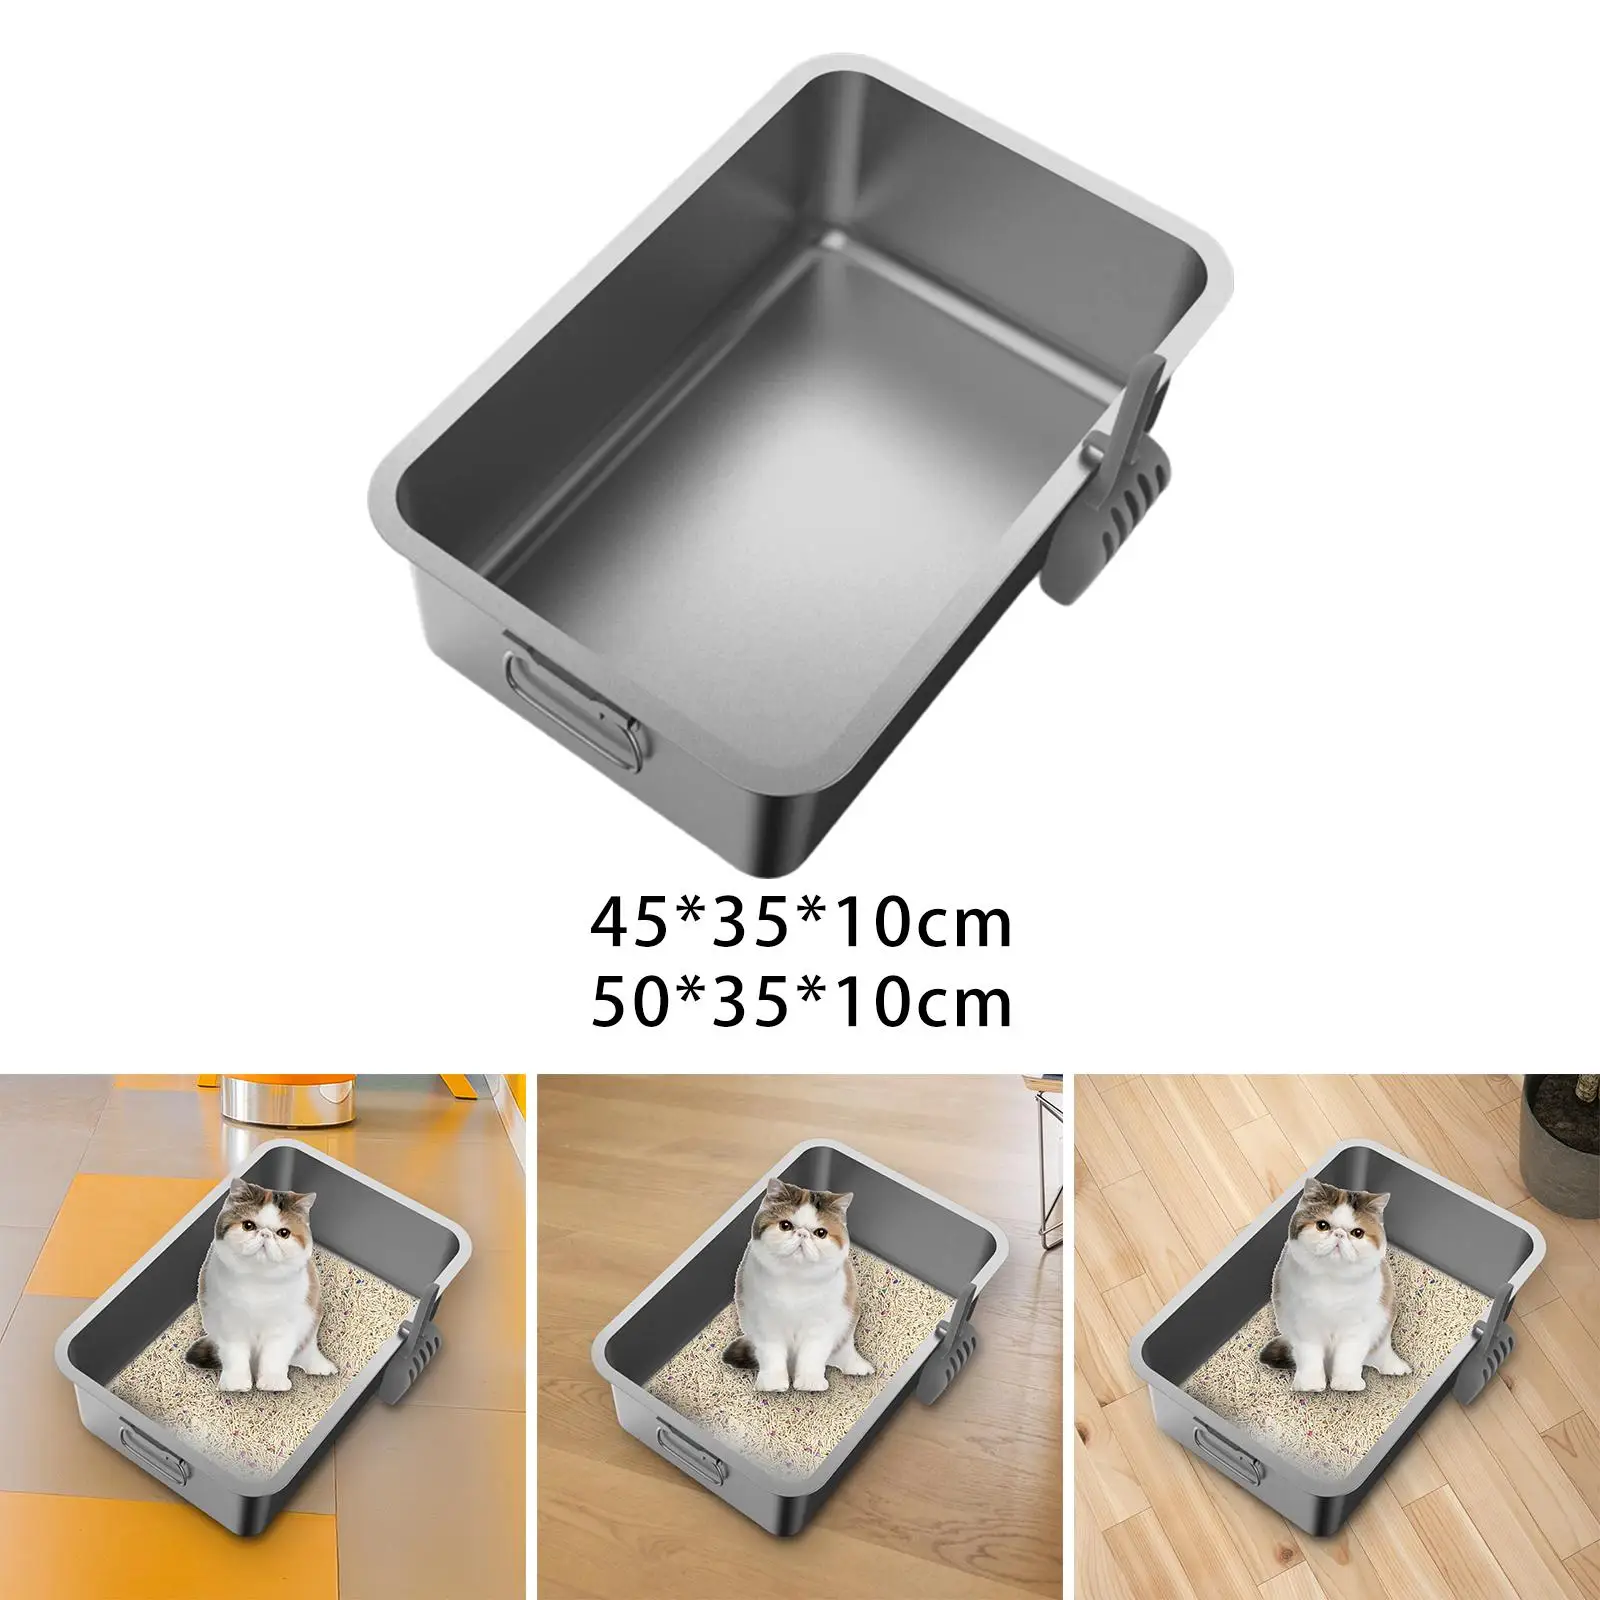 Kitten Cat Litter Box Stainless Steel Rounded Edges Anti Rust with Side Carrying Handle